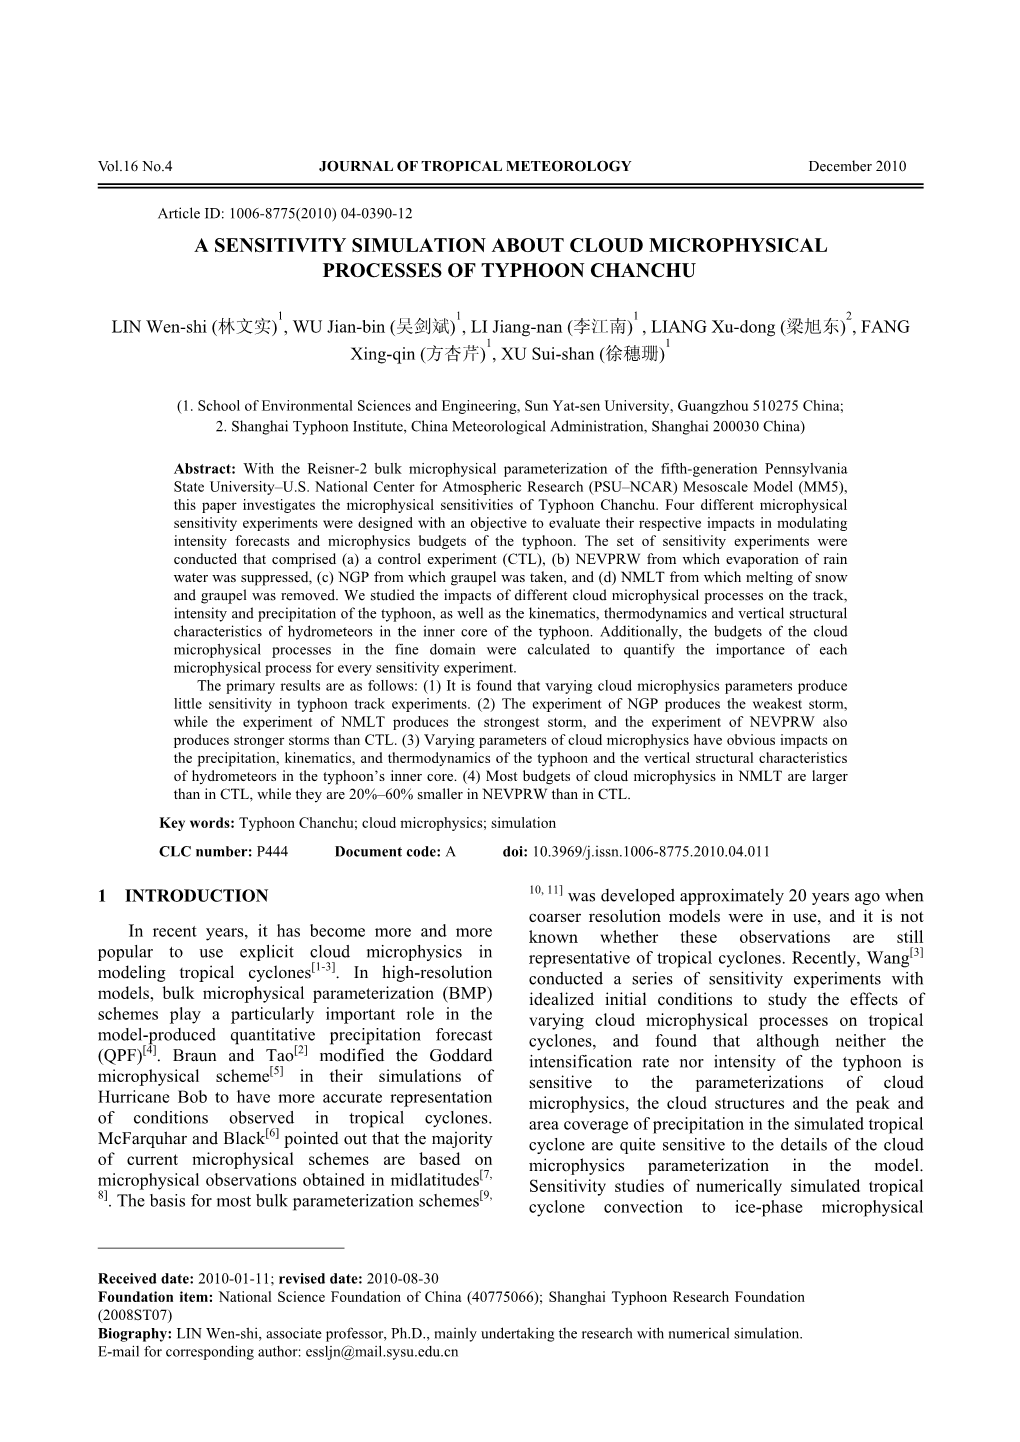 A Sensitivity Simulation About Cloud Microphysical Processes of Typhoon Chanchu